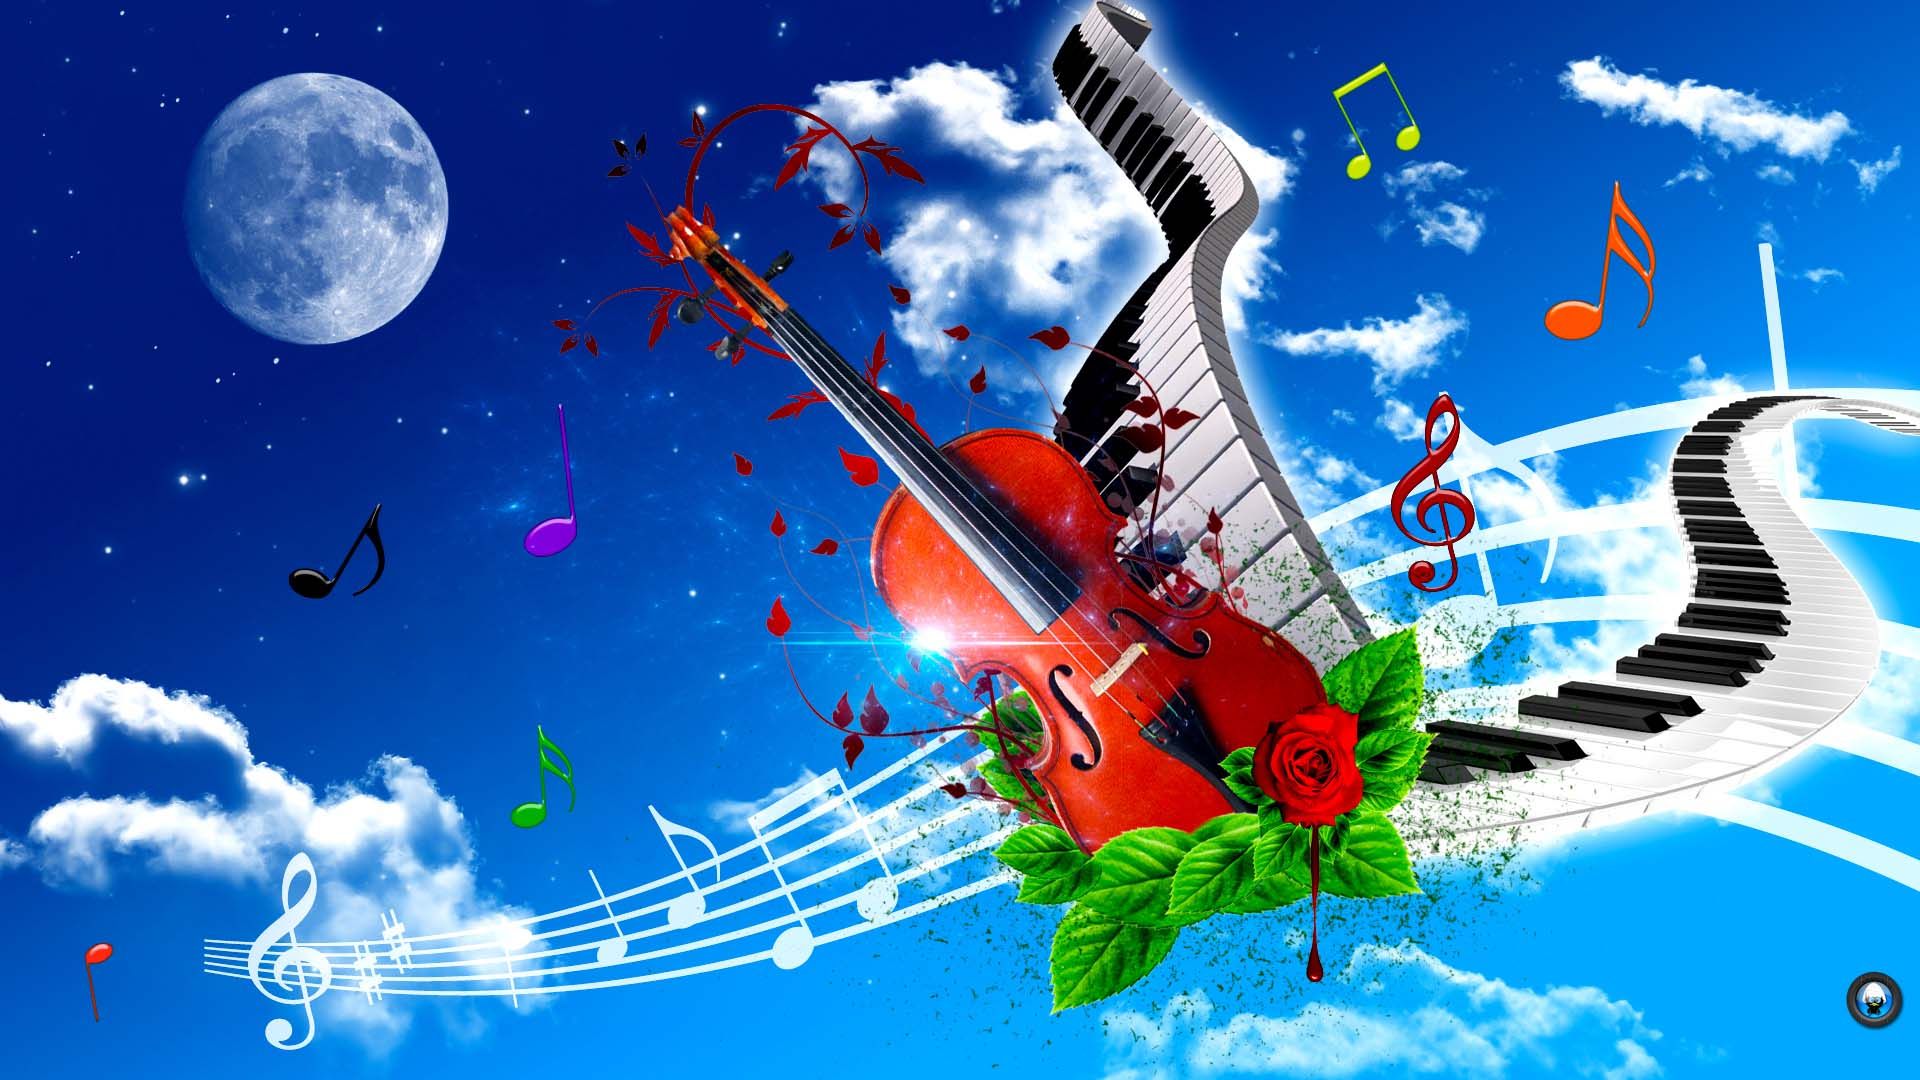 Latest Violin Hd New Wallpapers Free Download New HD Wallpapers